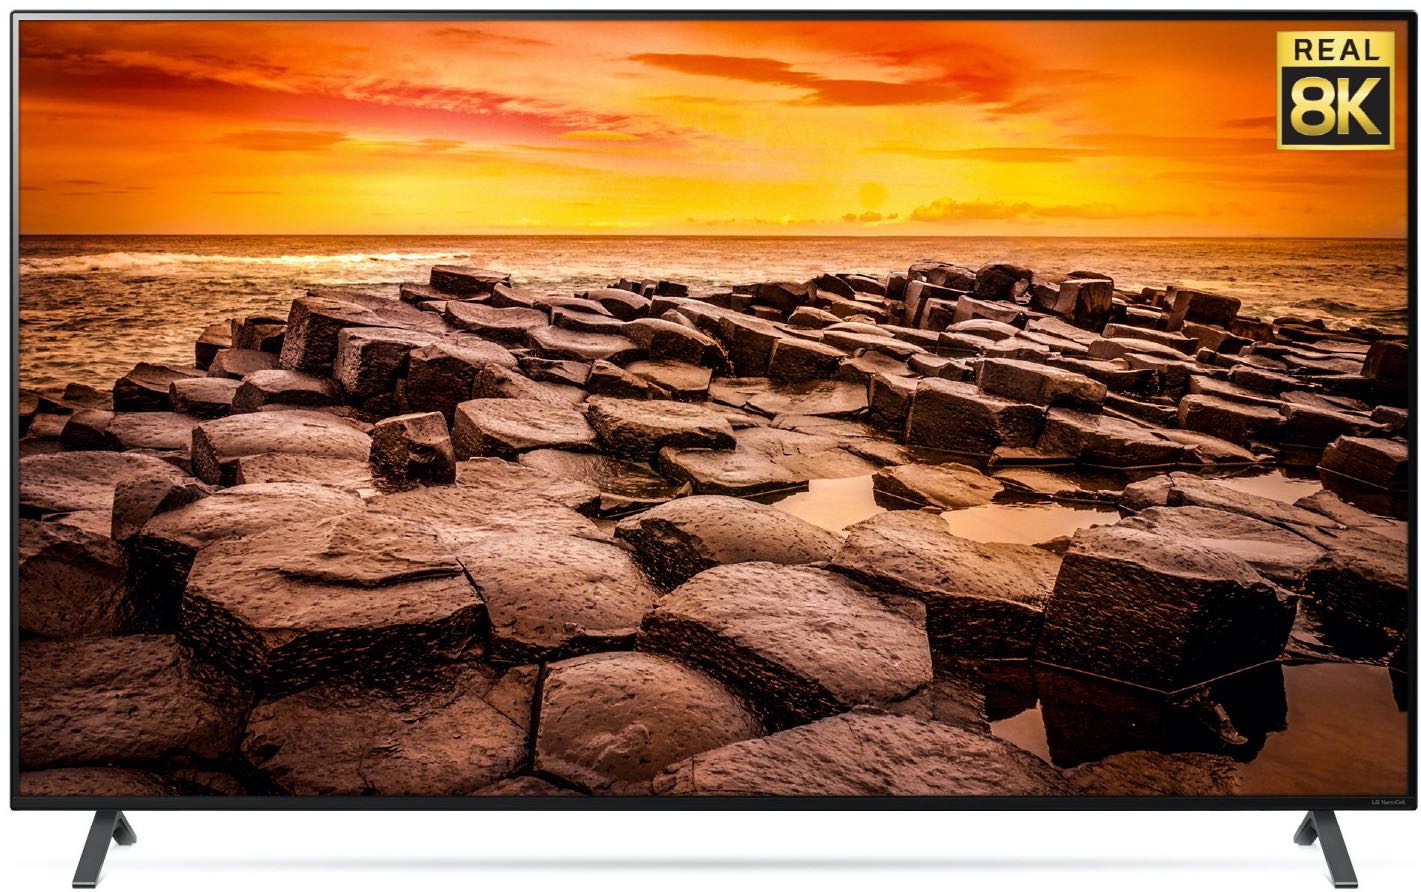 Take That, Samsung: LG Will Announce Eight 'Real' 8K TVs at CES 2020